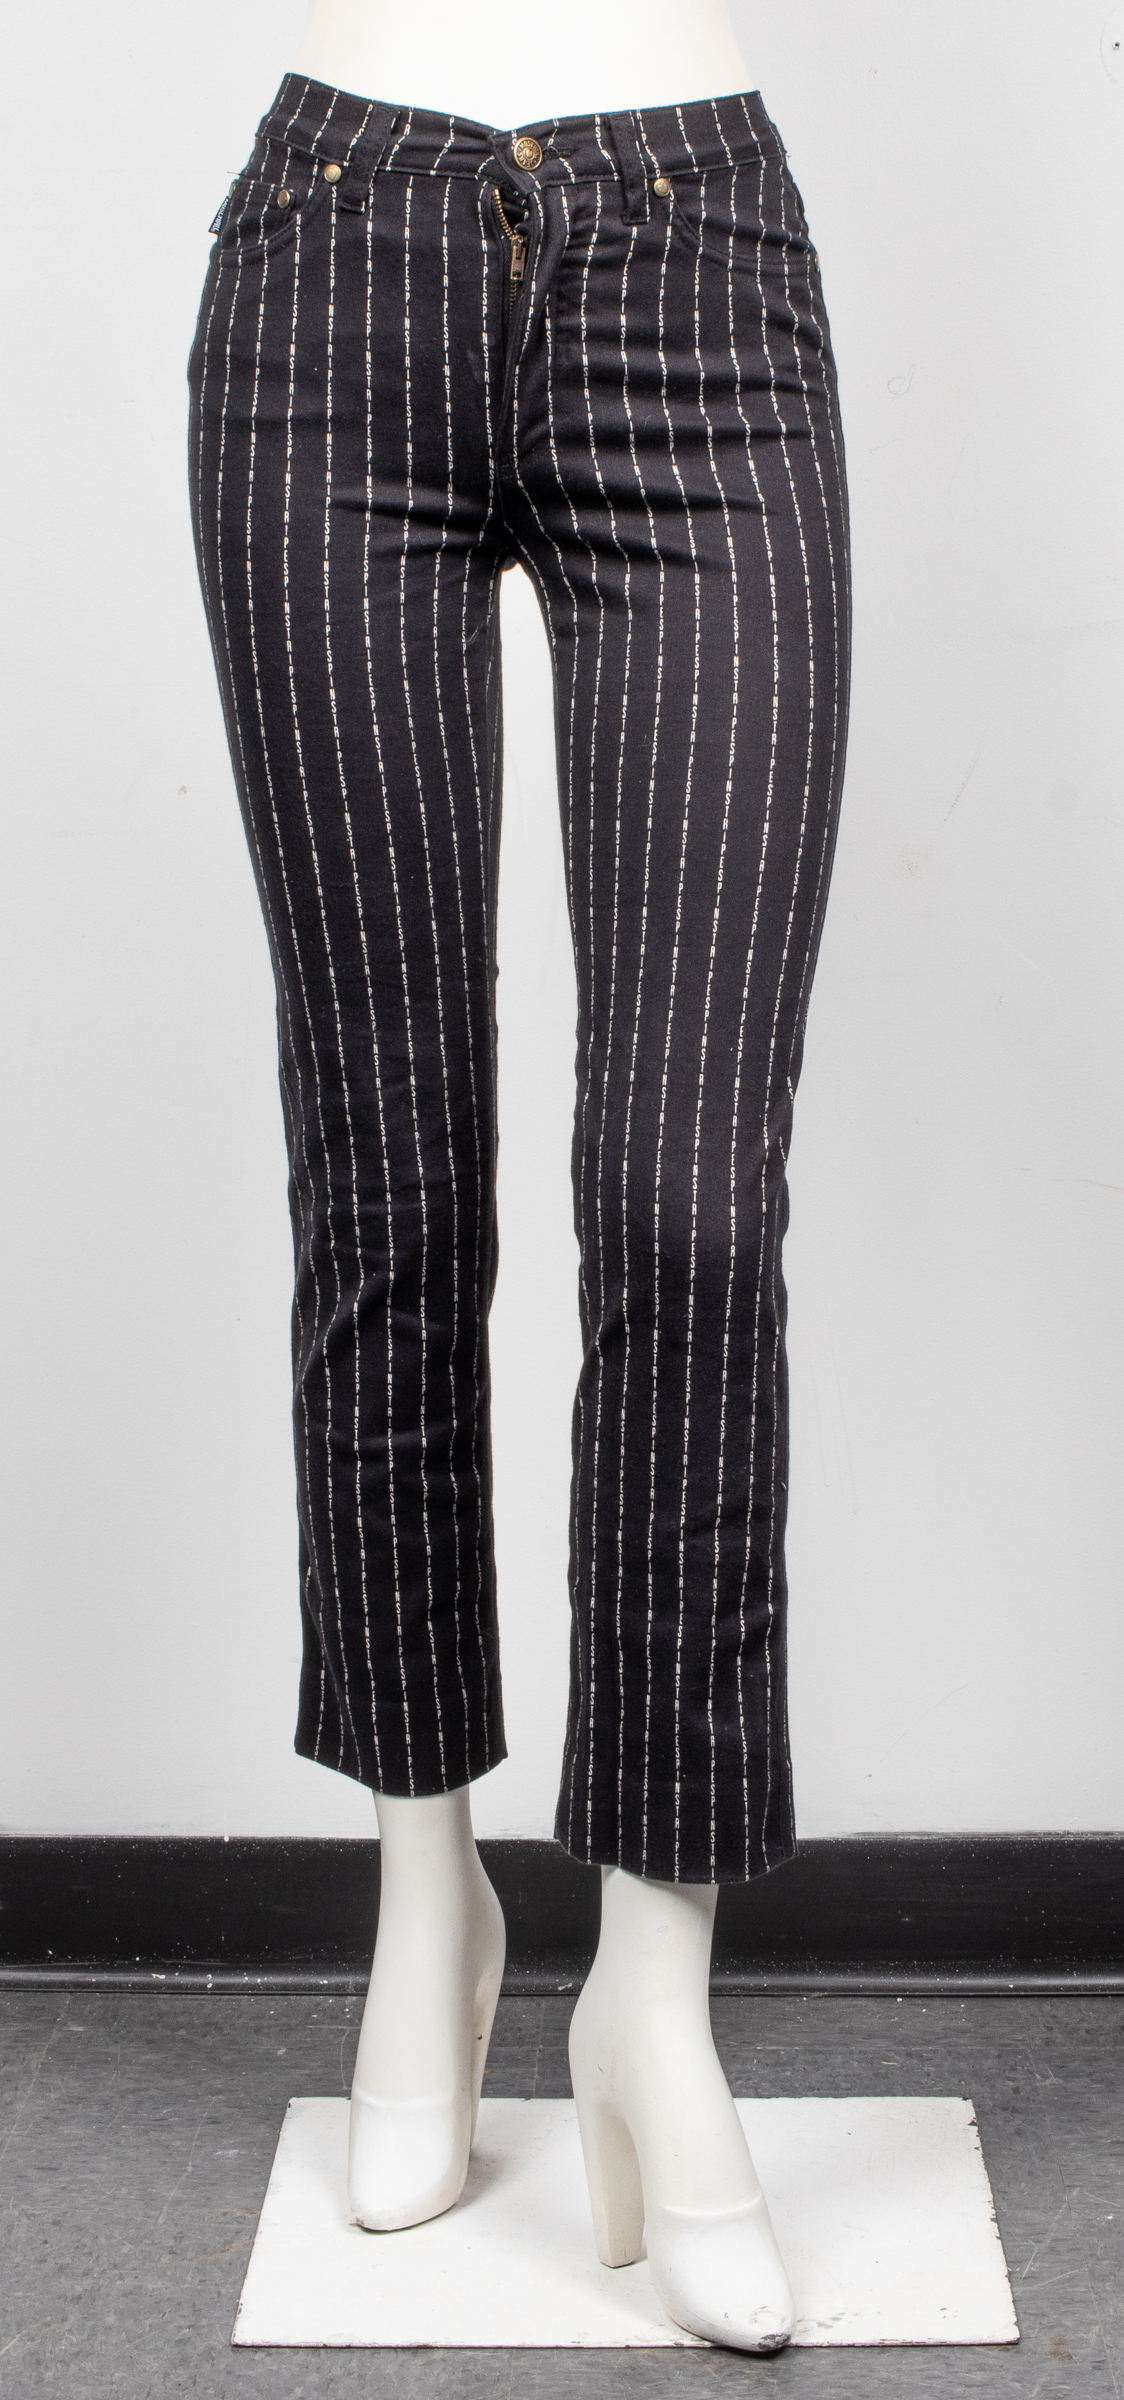 MOSCHINO PIN STRIPES SKINNY JEANS  3c310d